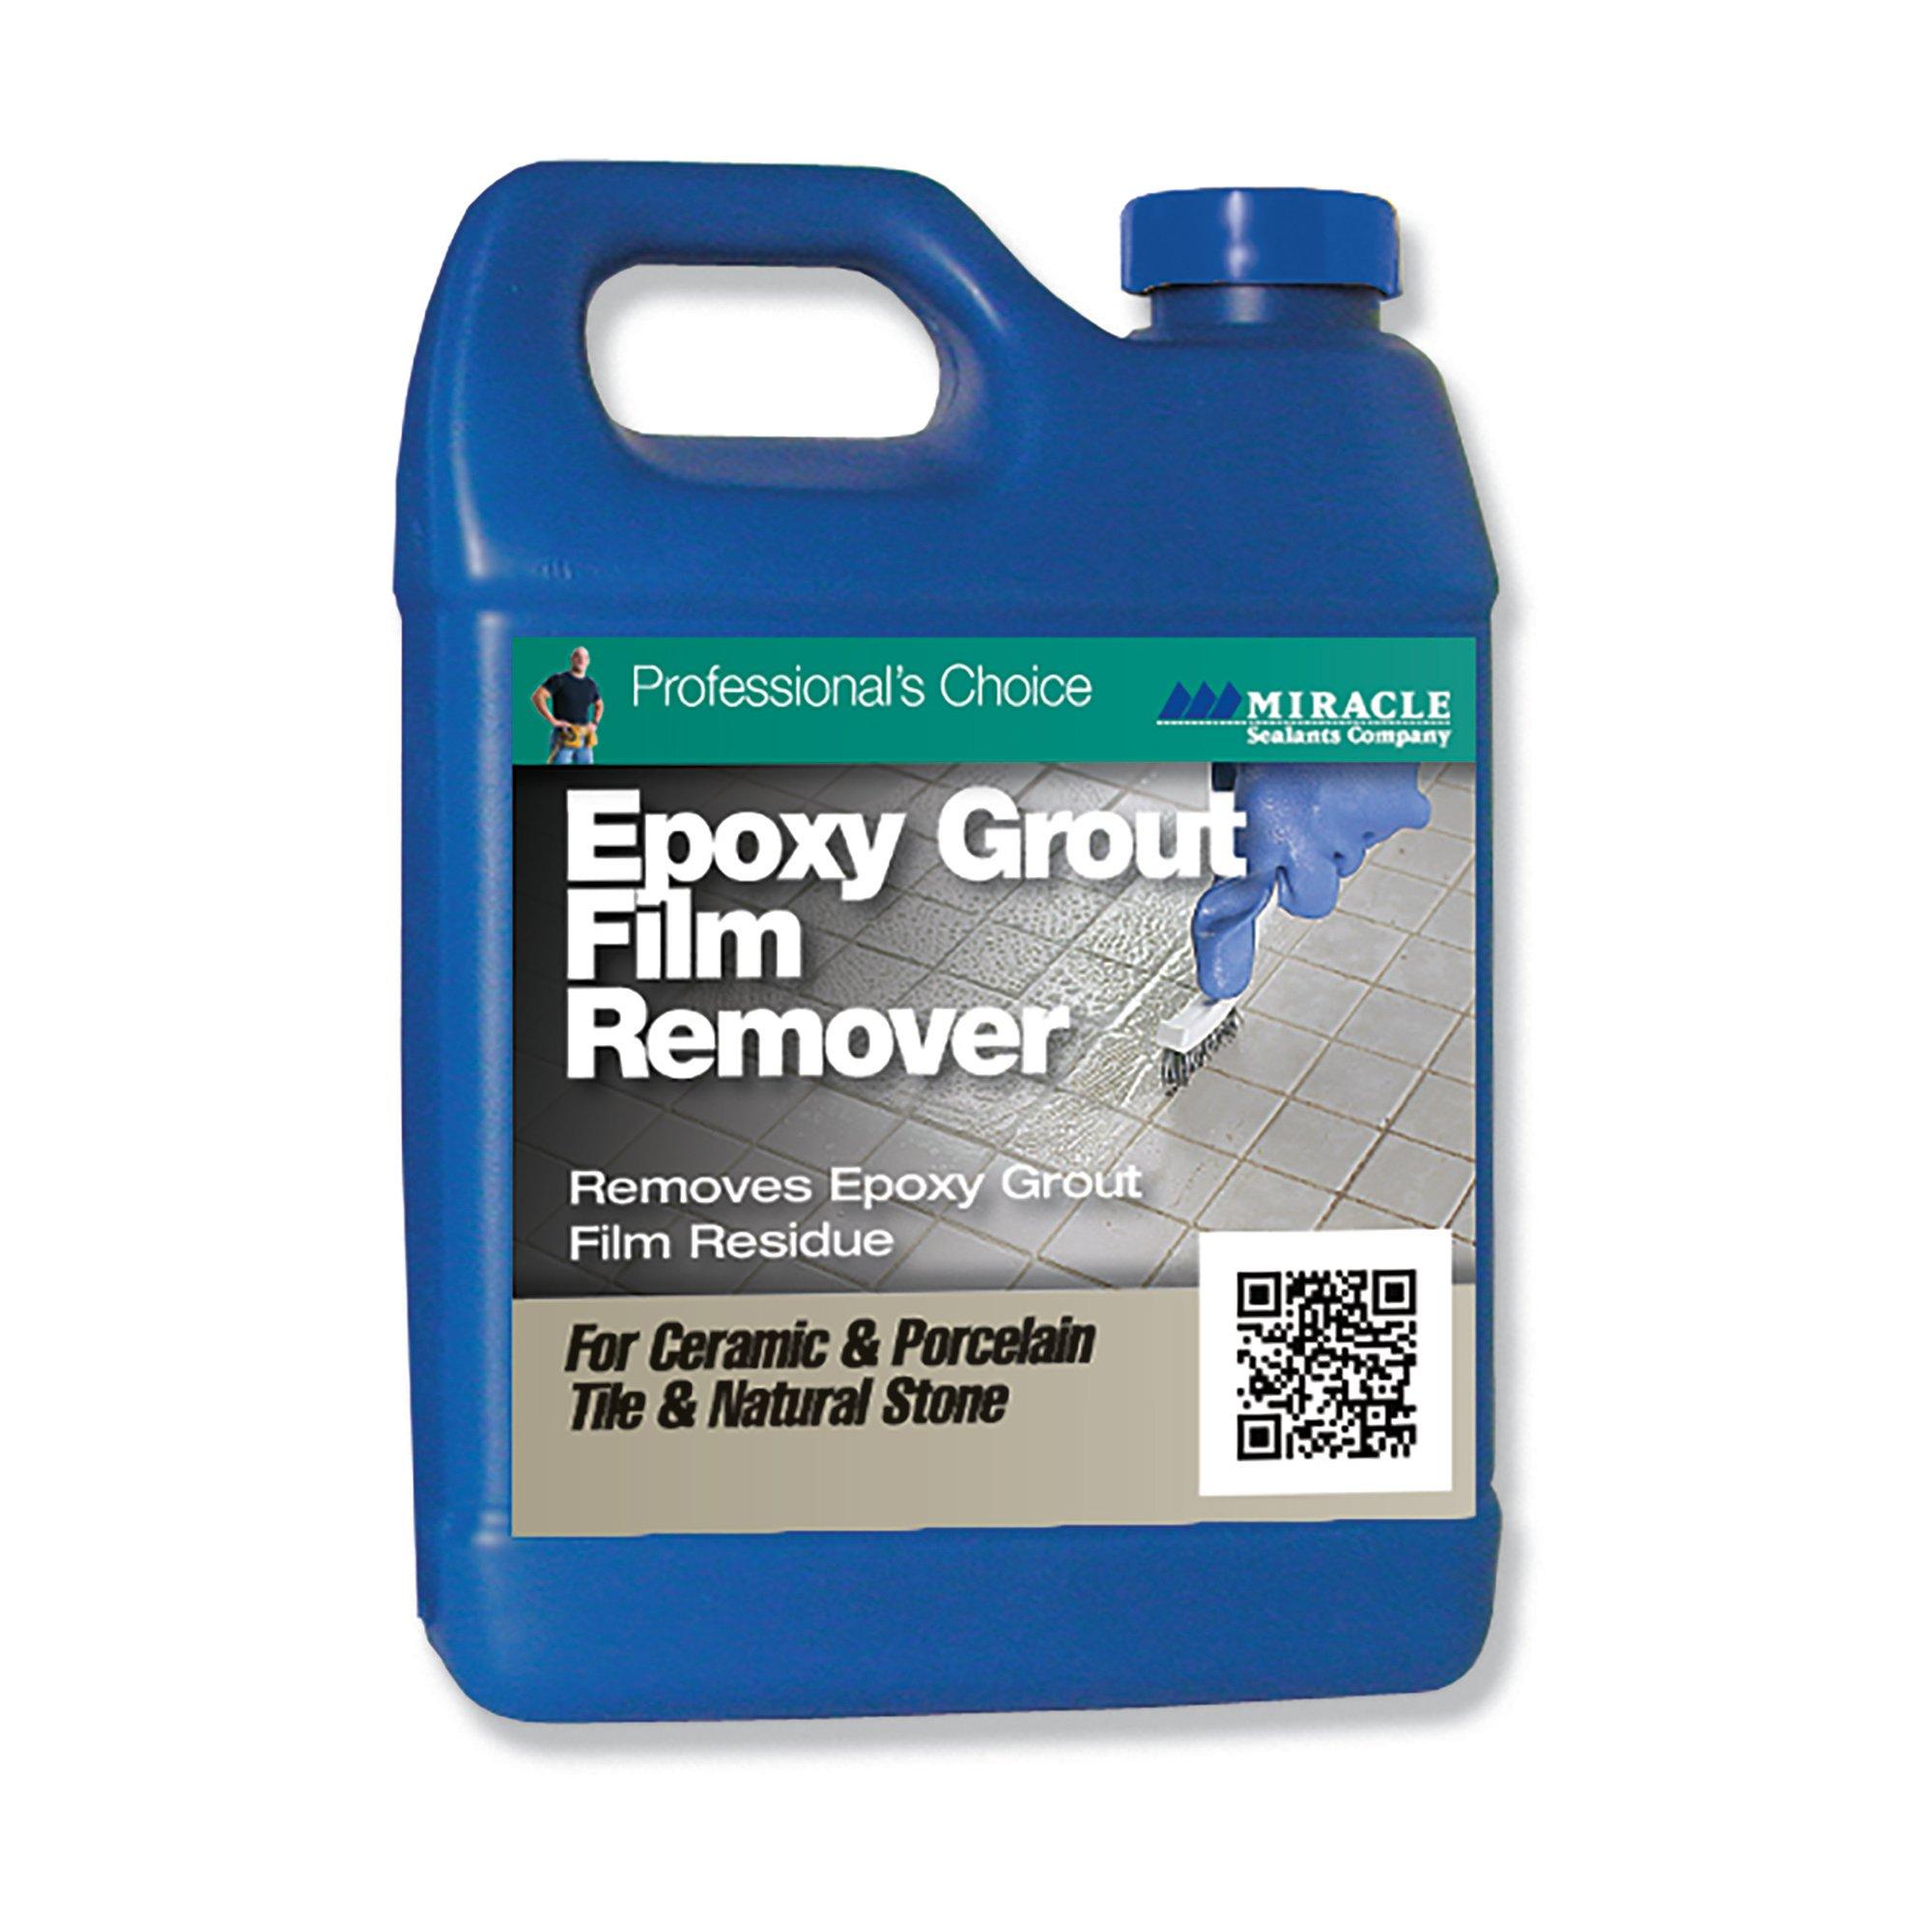 Miracle Epoxy Grout Film Remover